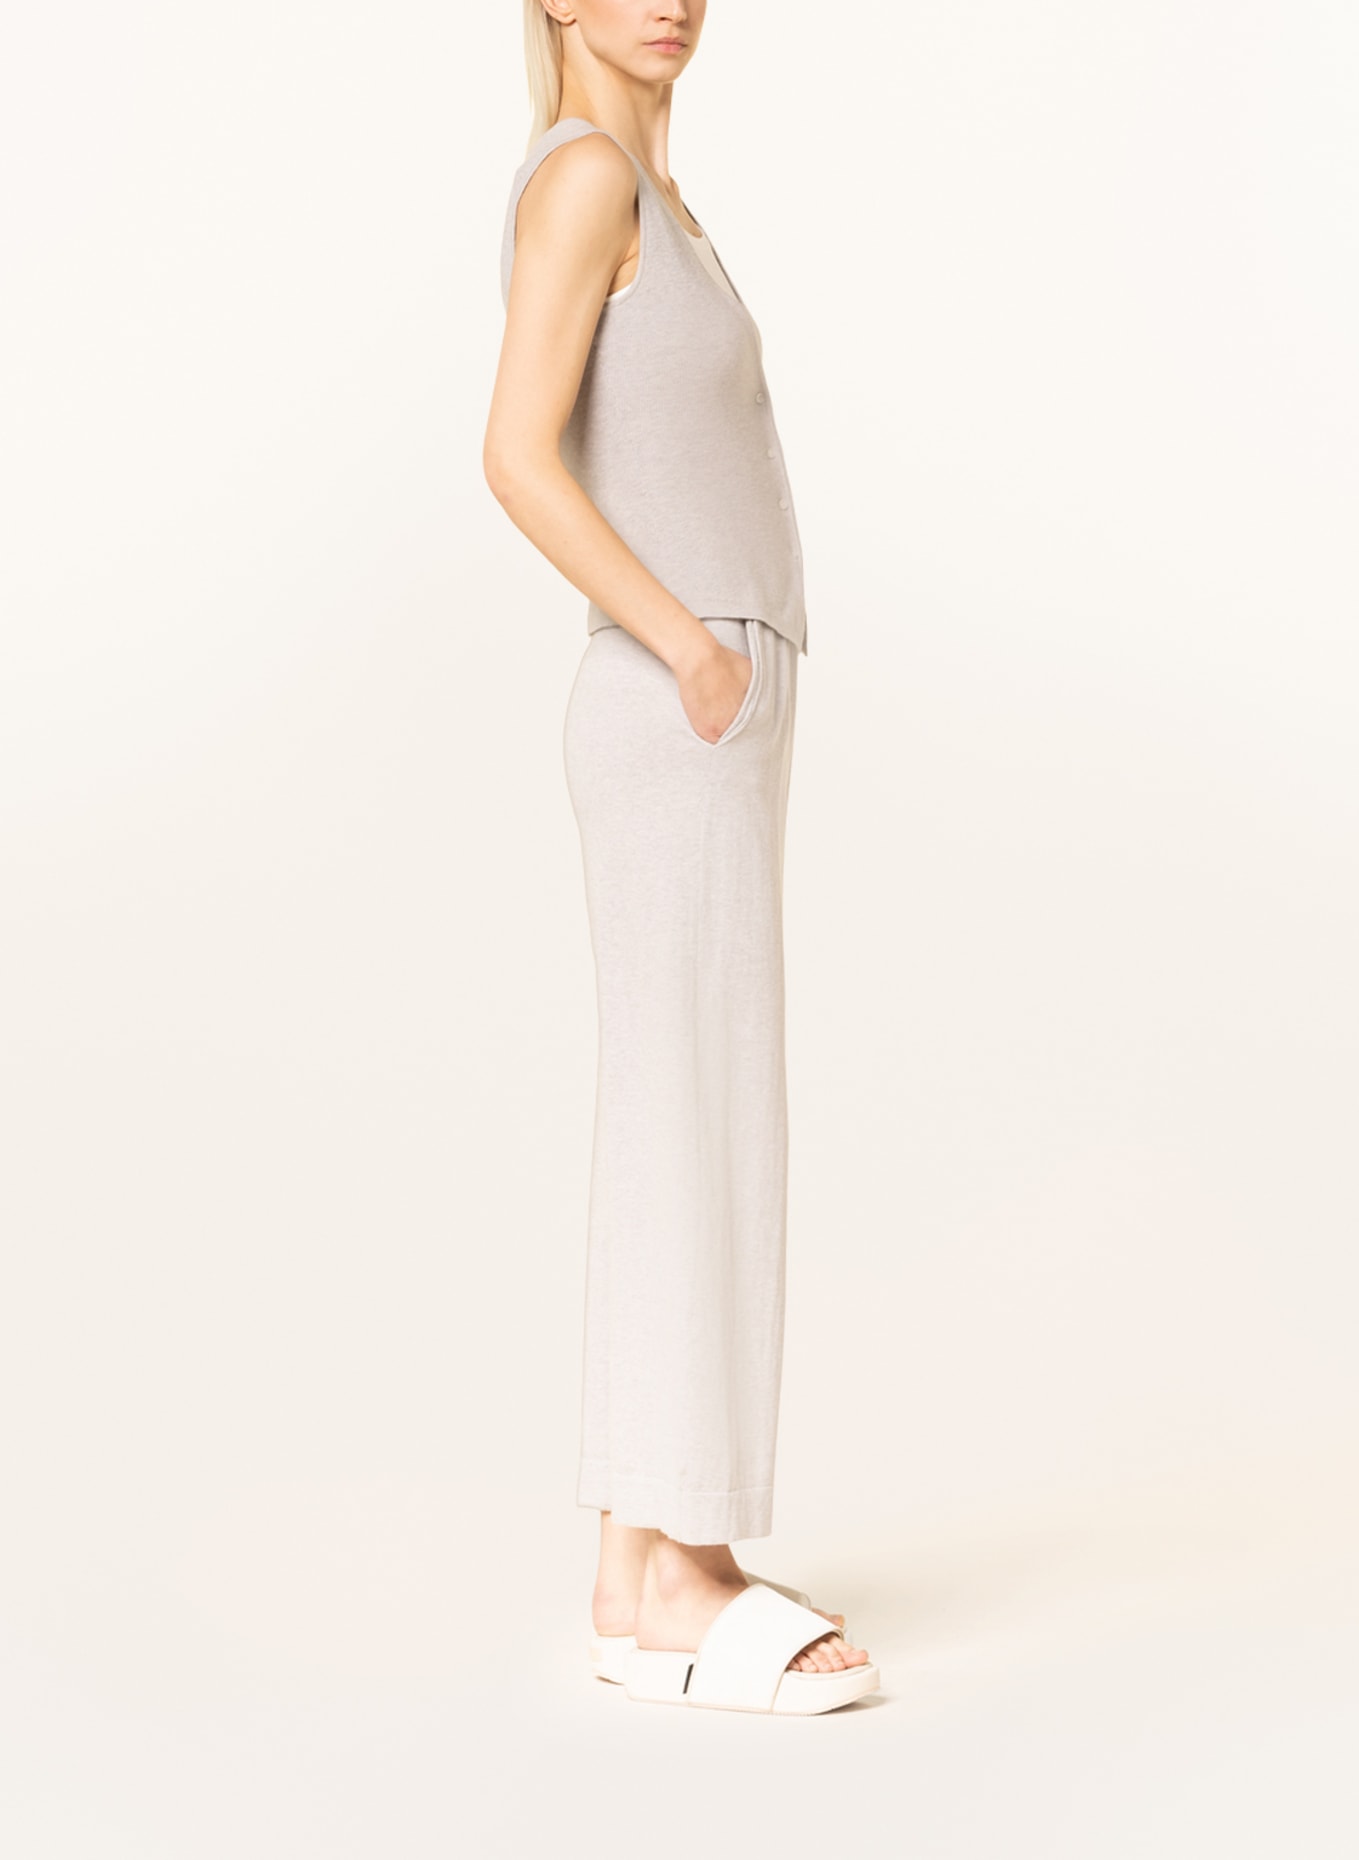 GITTA BANKO Knit trousers in jogger style with cashmere, Color: LIGHT GRAY (Image 4)